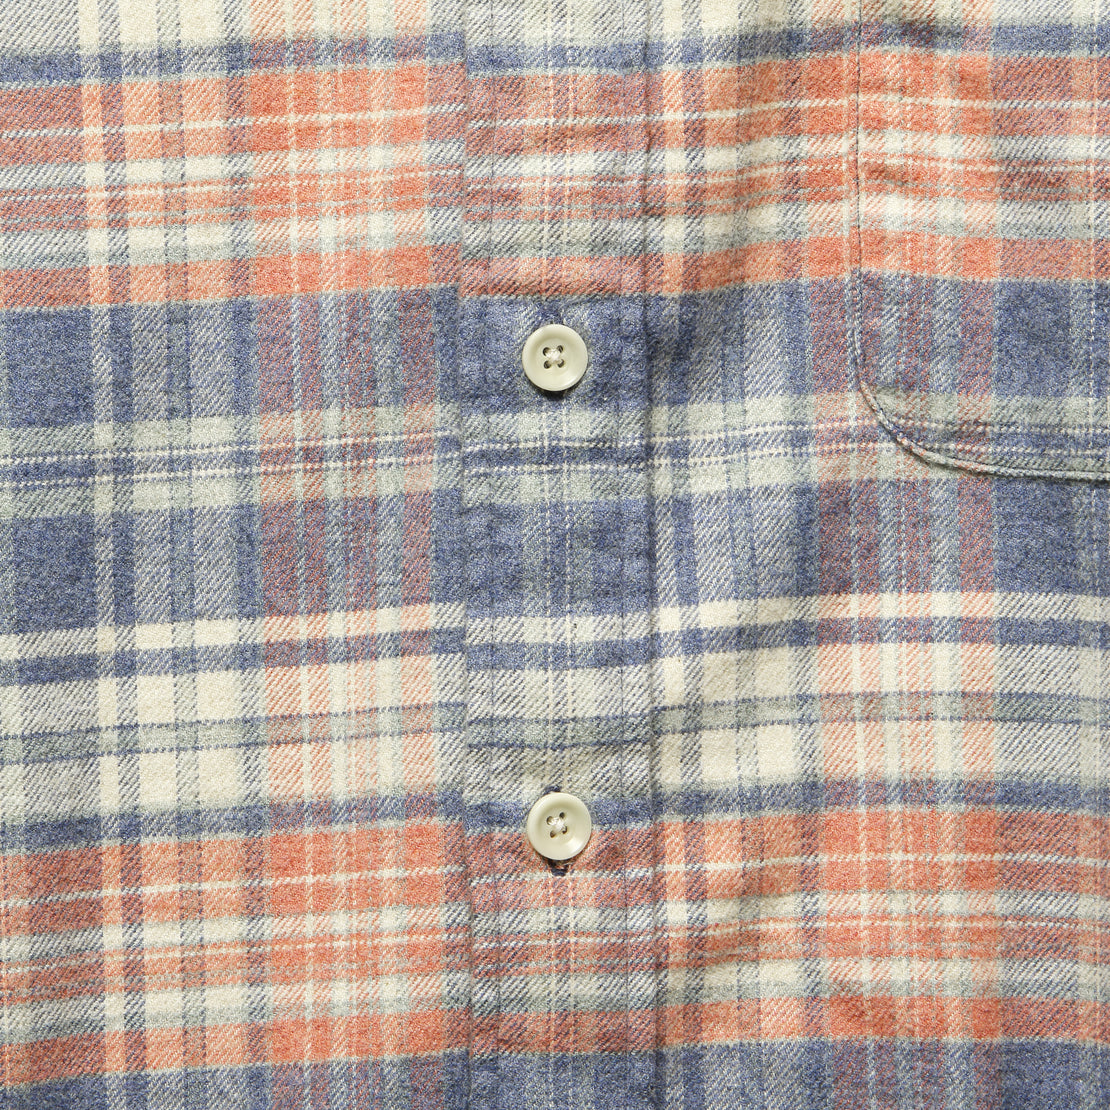 Stretch Seaview Flannel - Autumn Plaid - Faherty - STAG Provisions - Tops - L/S Woven - Plaid